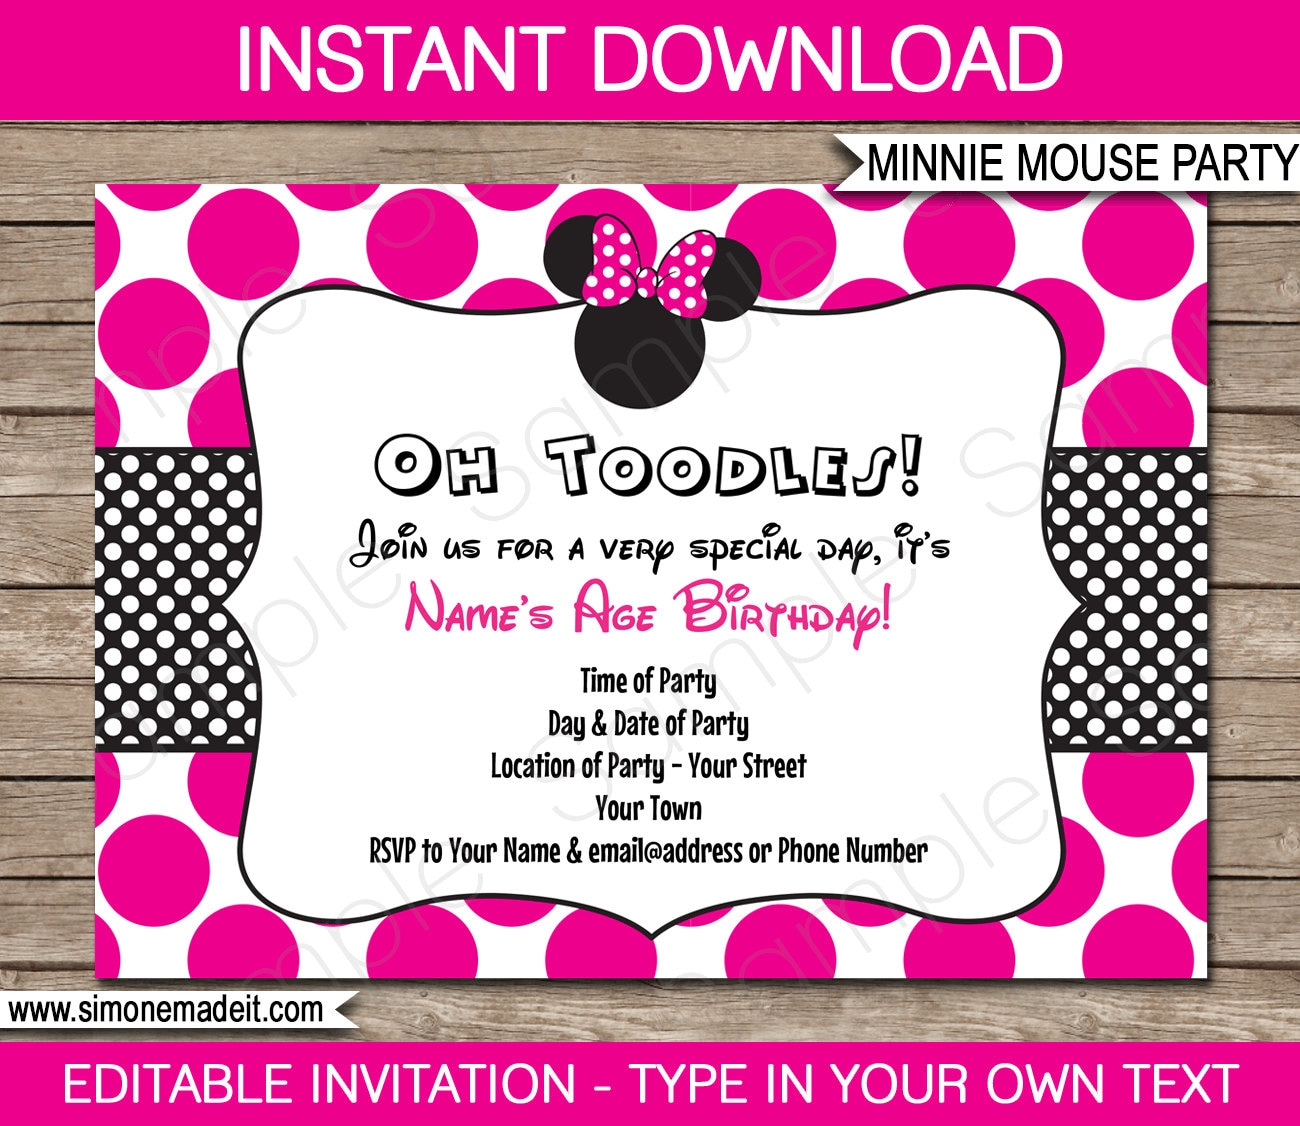 Minnie Mouse Invitation Template - Birthday Party - Pink - INSTANT DOWNLOAD  with EDITABLE text - you personalize at home With Regard To Minnie Mouse Card Templates